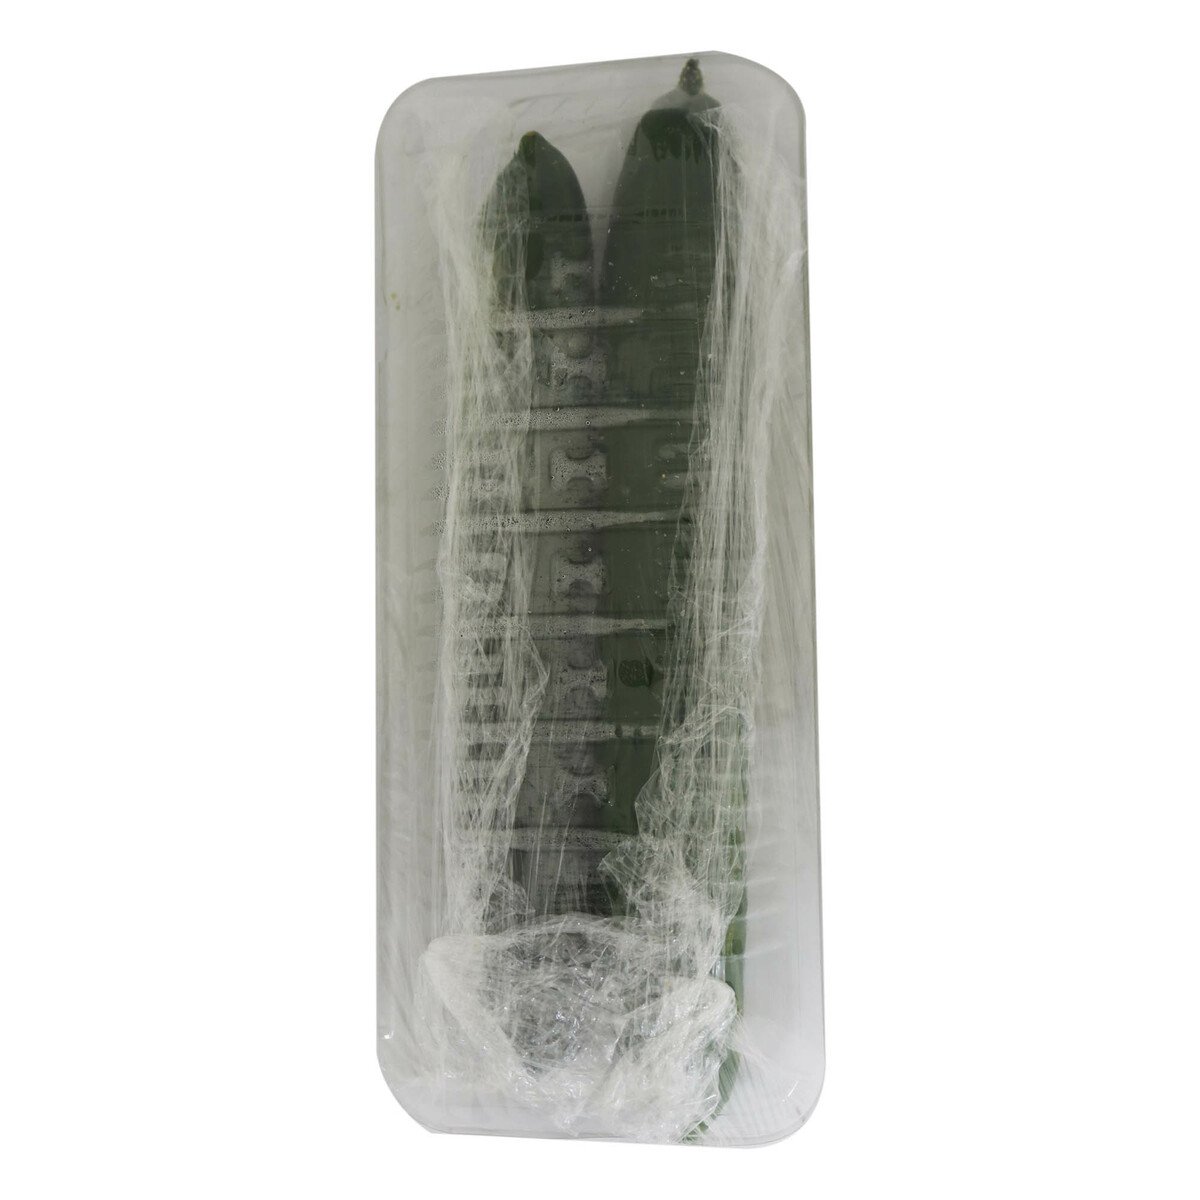 Japanese Cucumber Packet 300g Approx. Weight